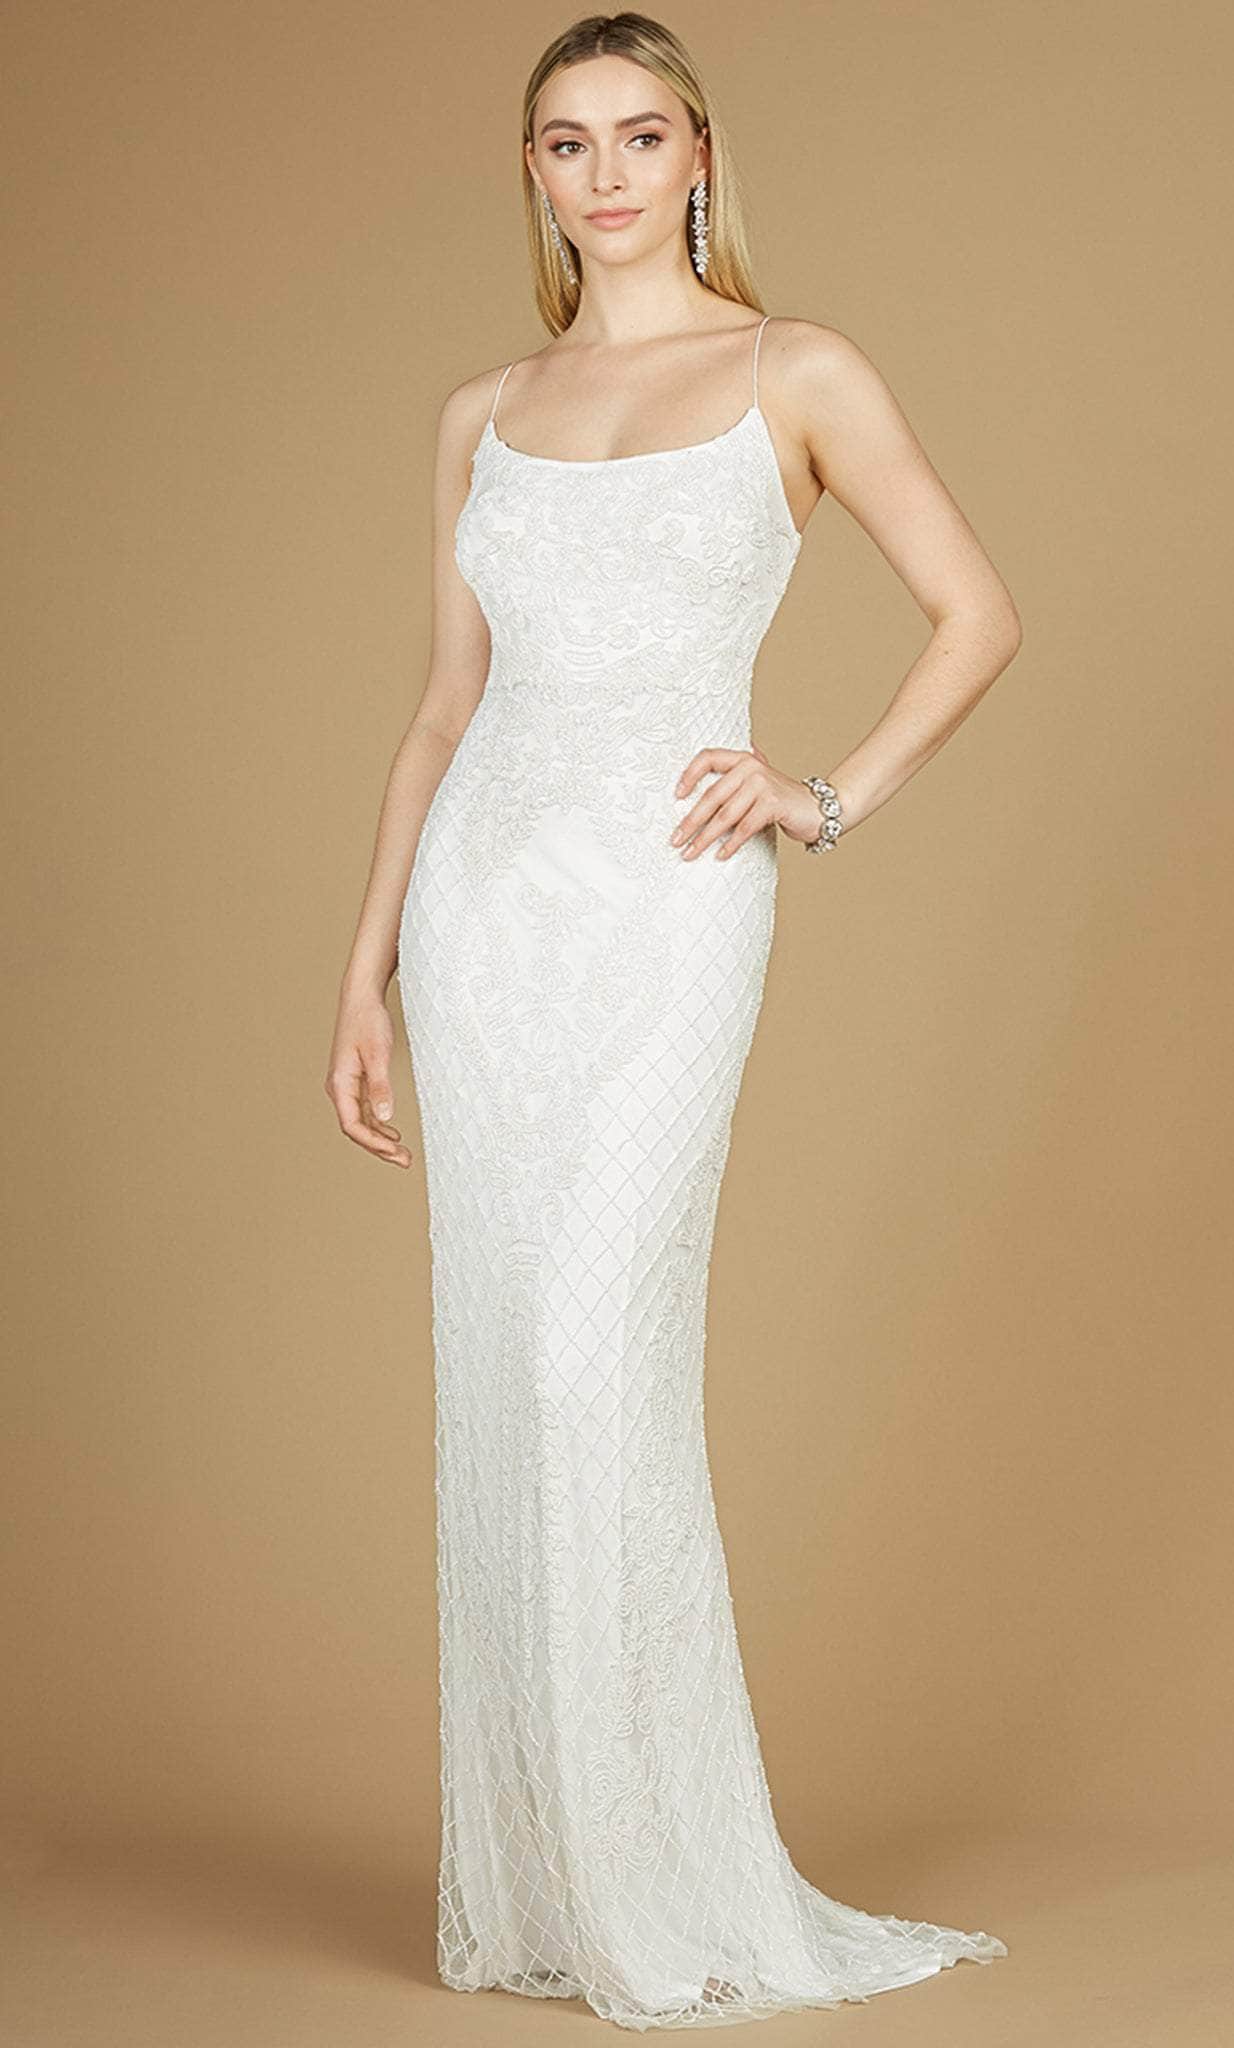 Image of Lara Dresses 51113 - Lace Embroidered Scoop Bridal Gown